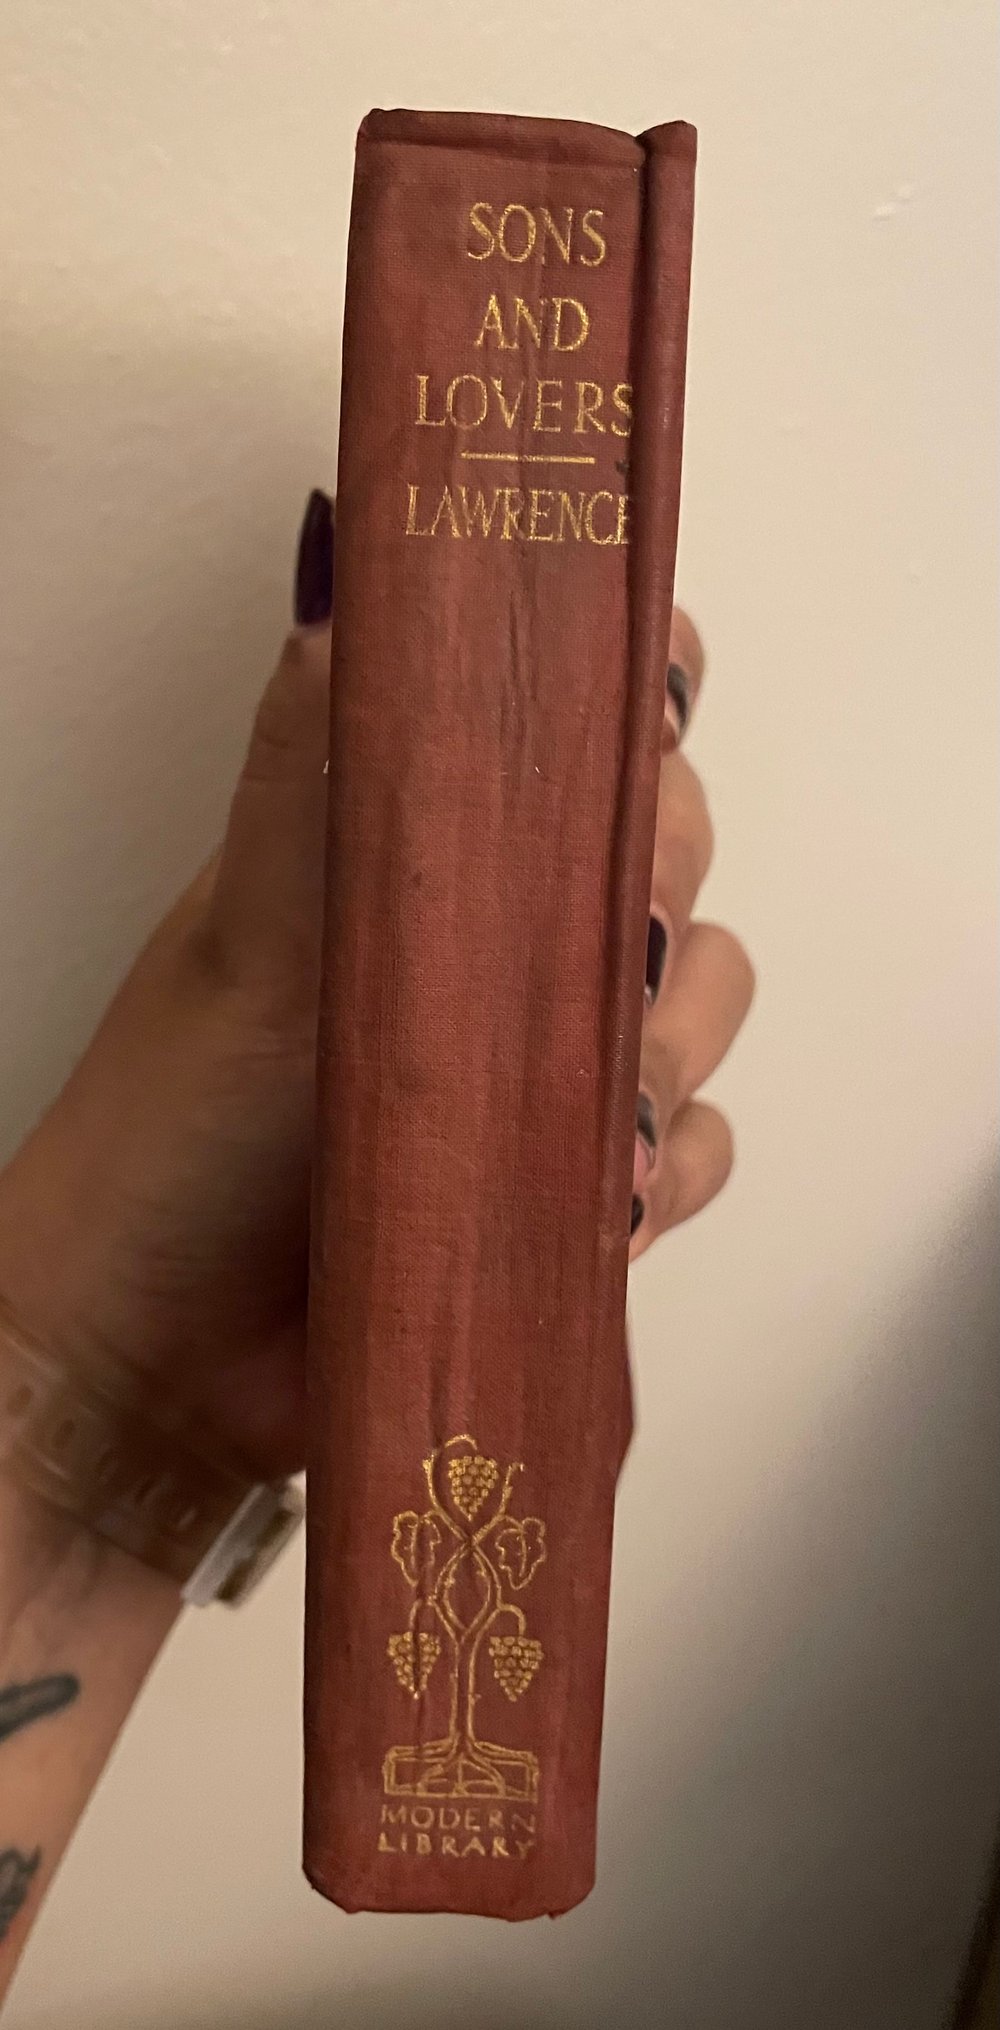 *RARE* Sons and Lovers by D.H. Lawrence (1922 Edition)